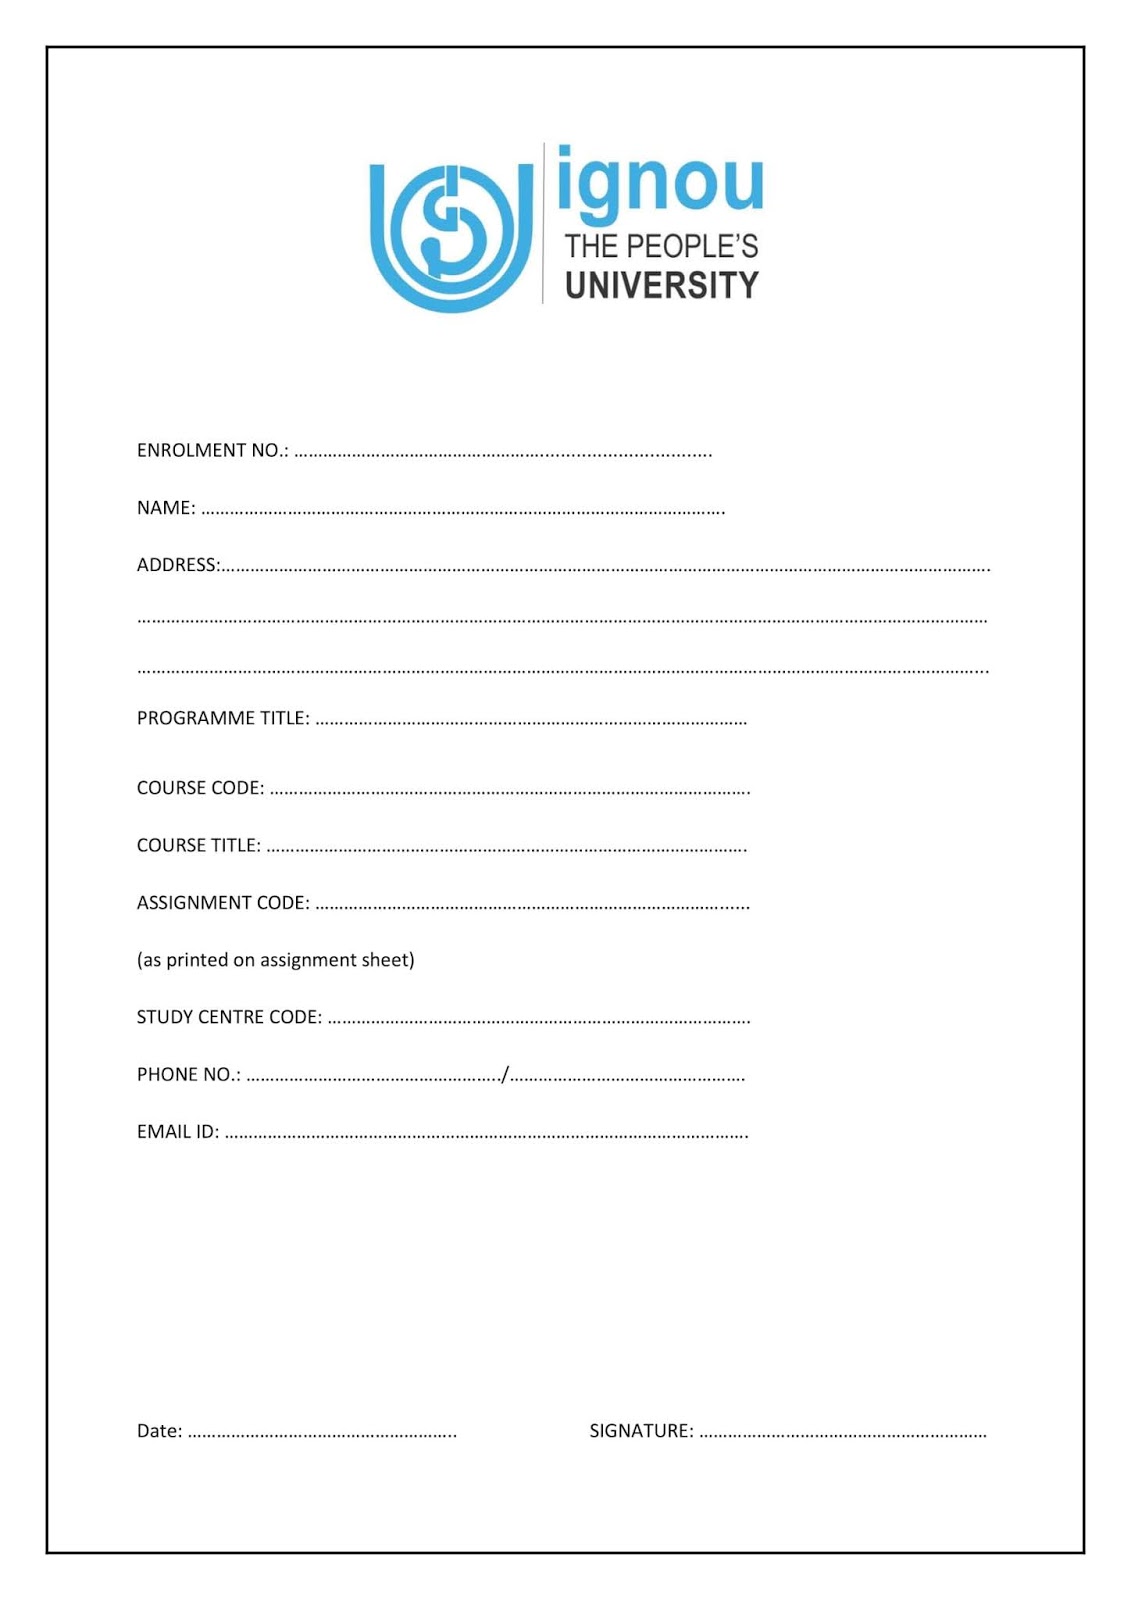 download assignment for ignou